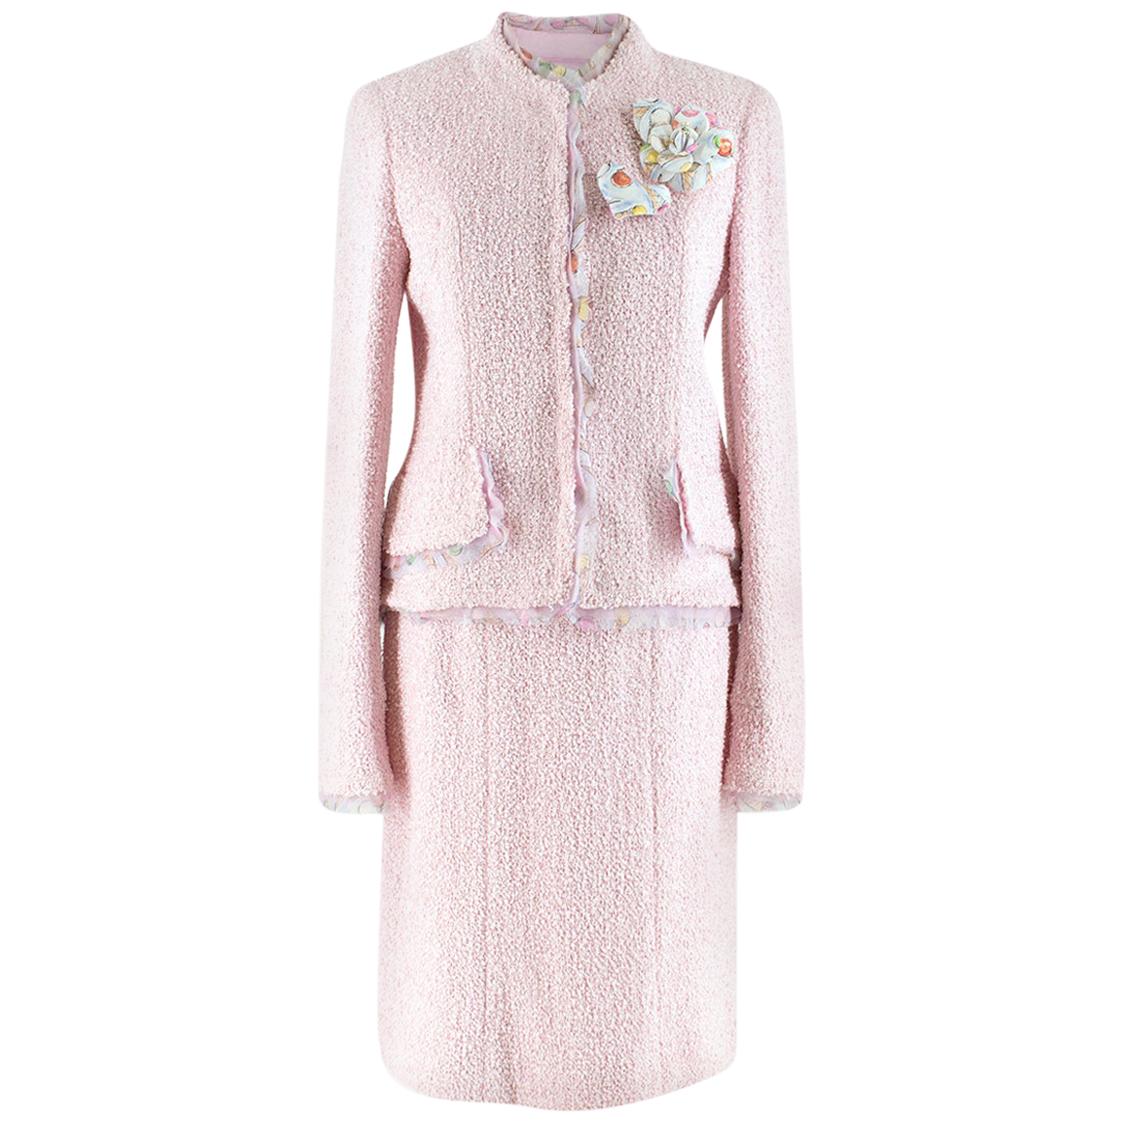 Chanel Cream Tweed Skirt Suit with Coco Chanel Buttons – Vintage Grace